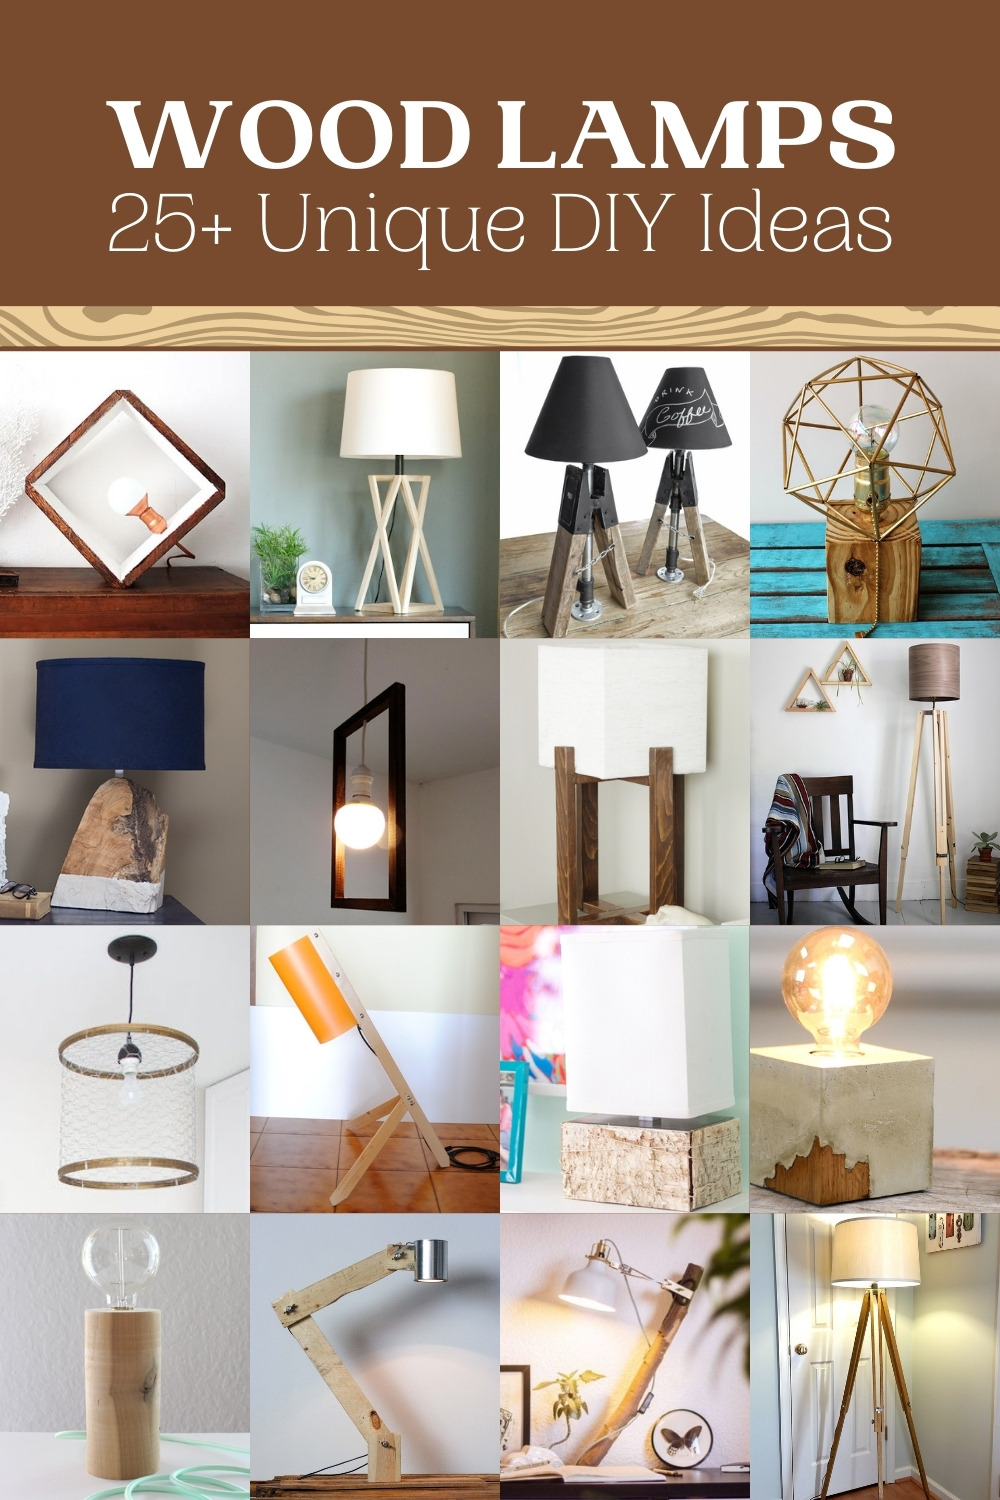 DIY Wood Lamps That Will Look Amazing in Your Home